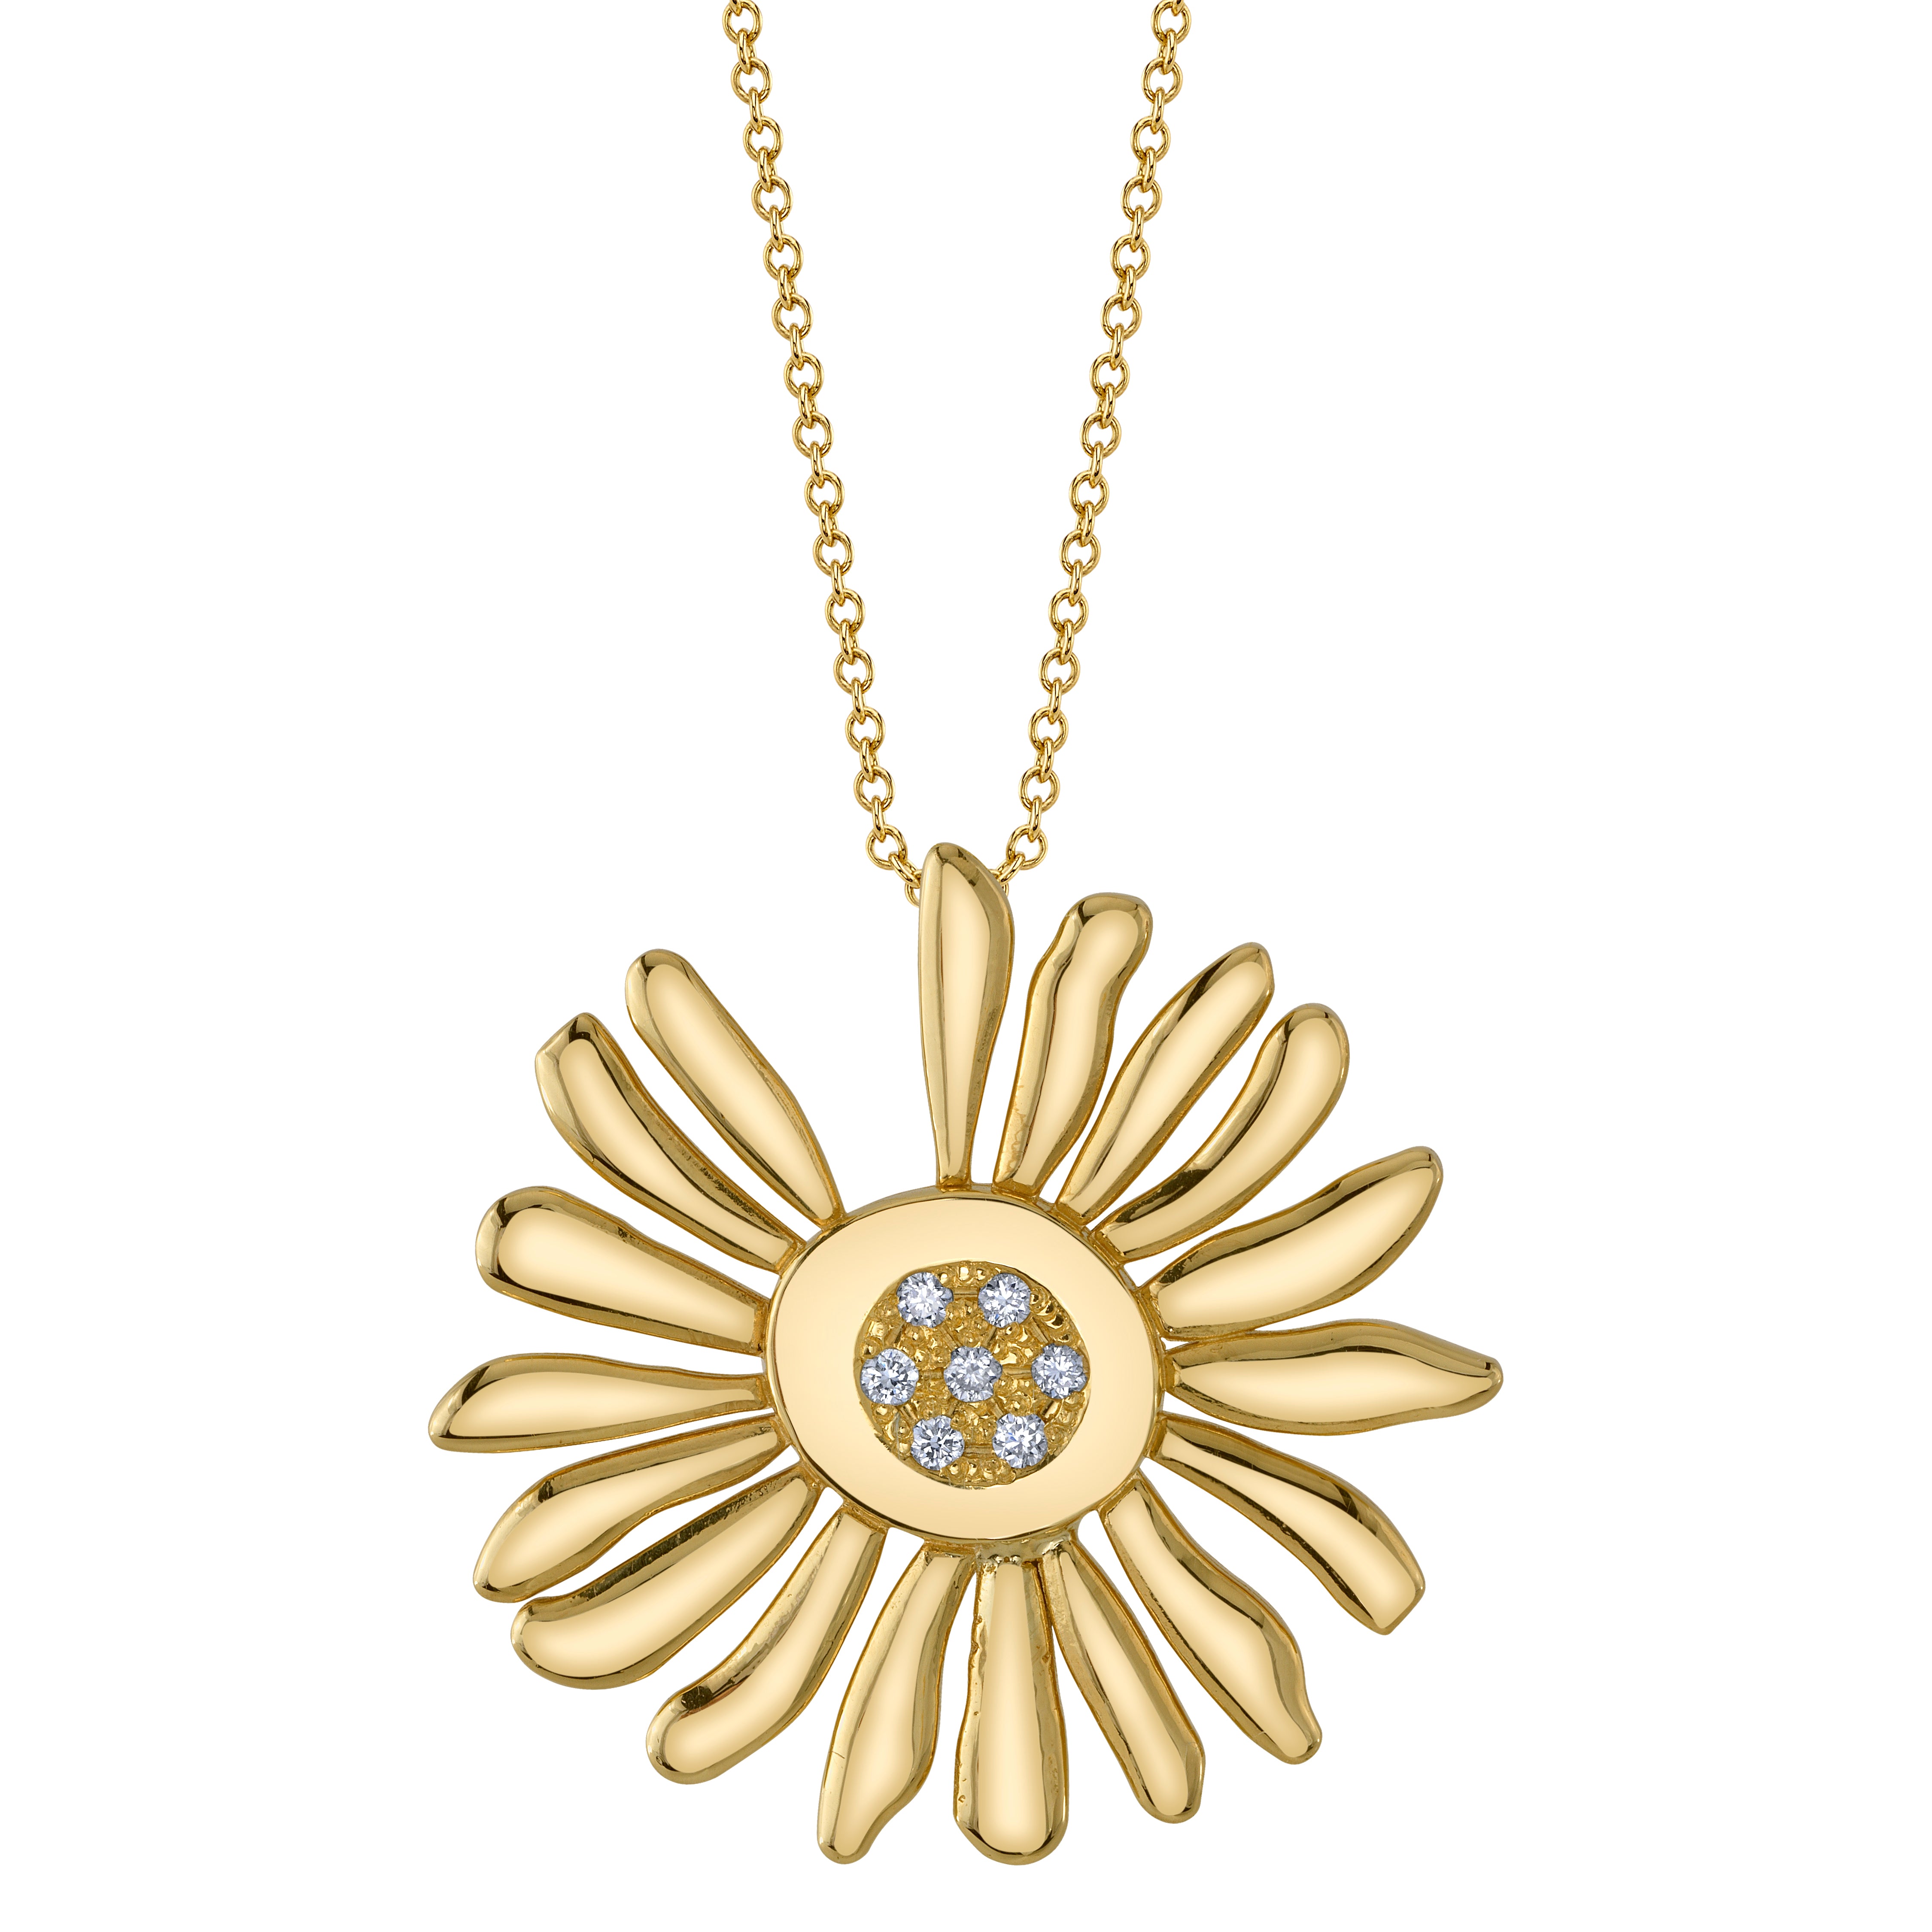 The Daisy Necklace Pendant Roseark Jewelry Yellow Gold  